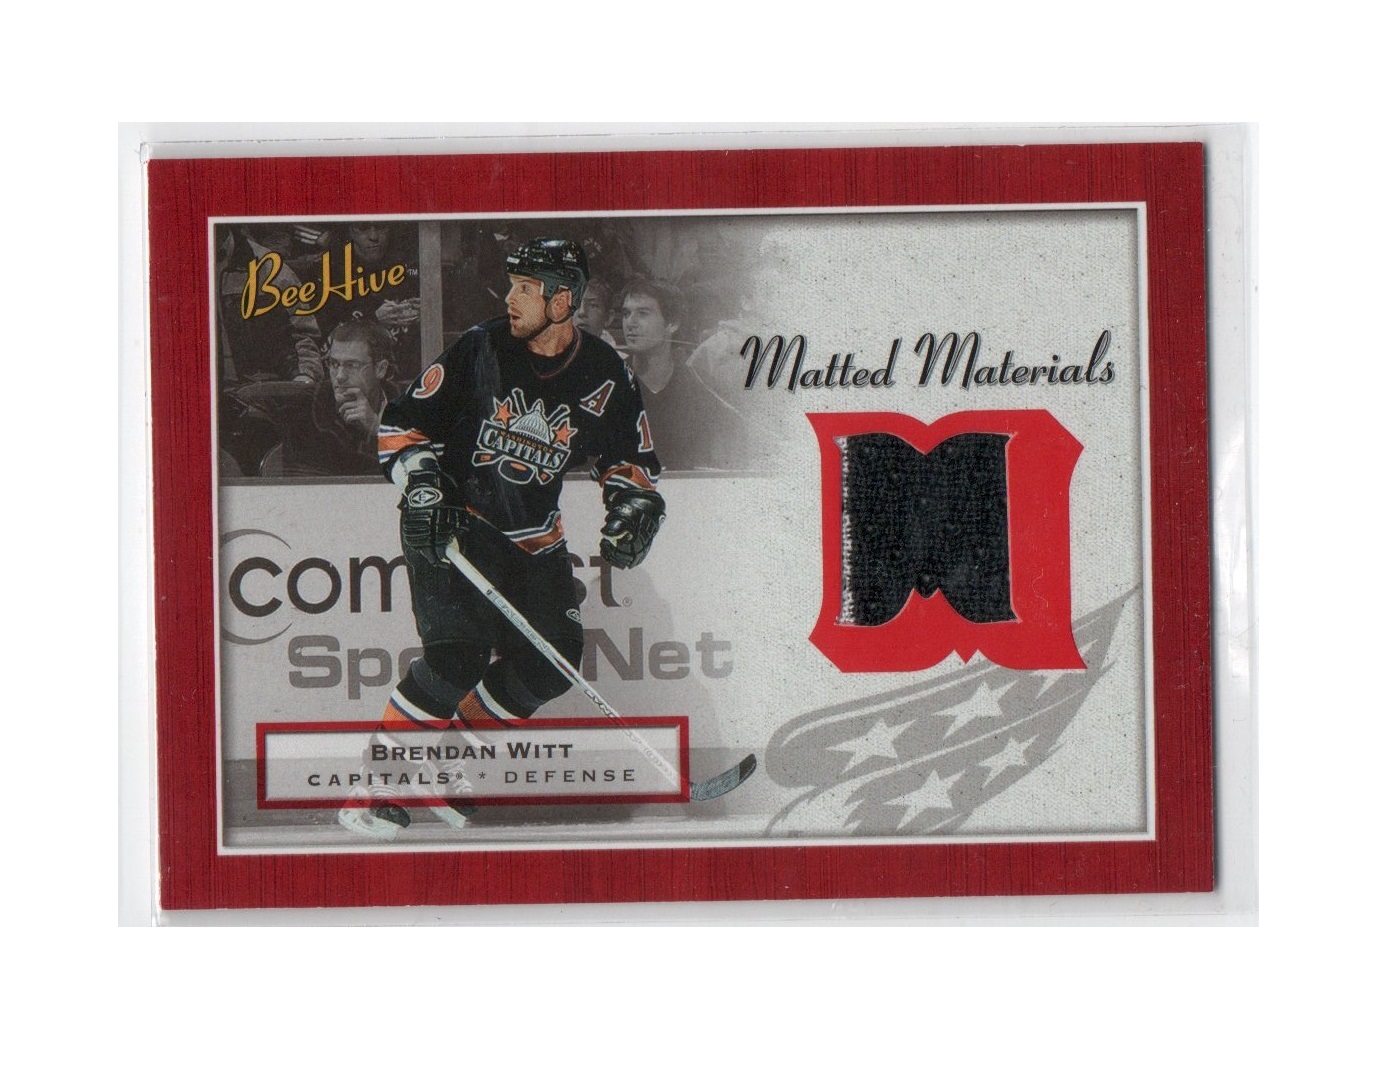 2005-06 Beehive Matted Materials #MMBW Brendan Witt (25-X231-GAMEUSED-CAPITALS)